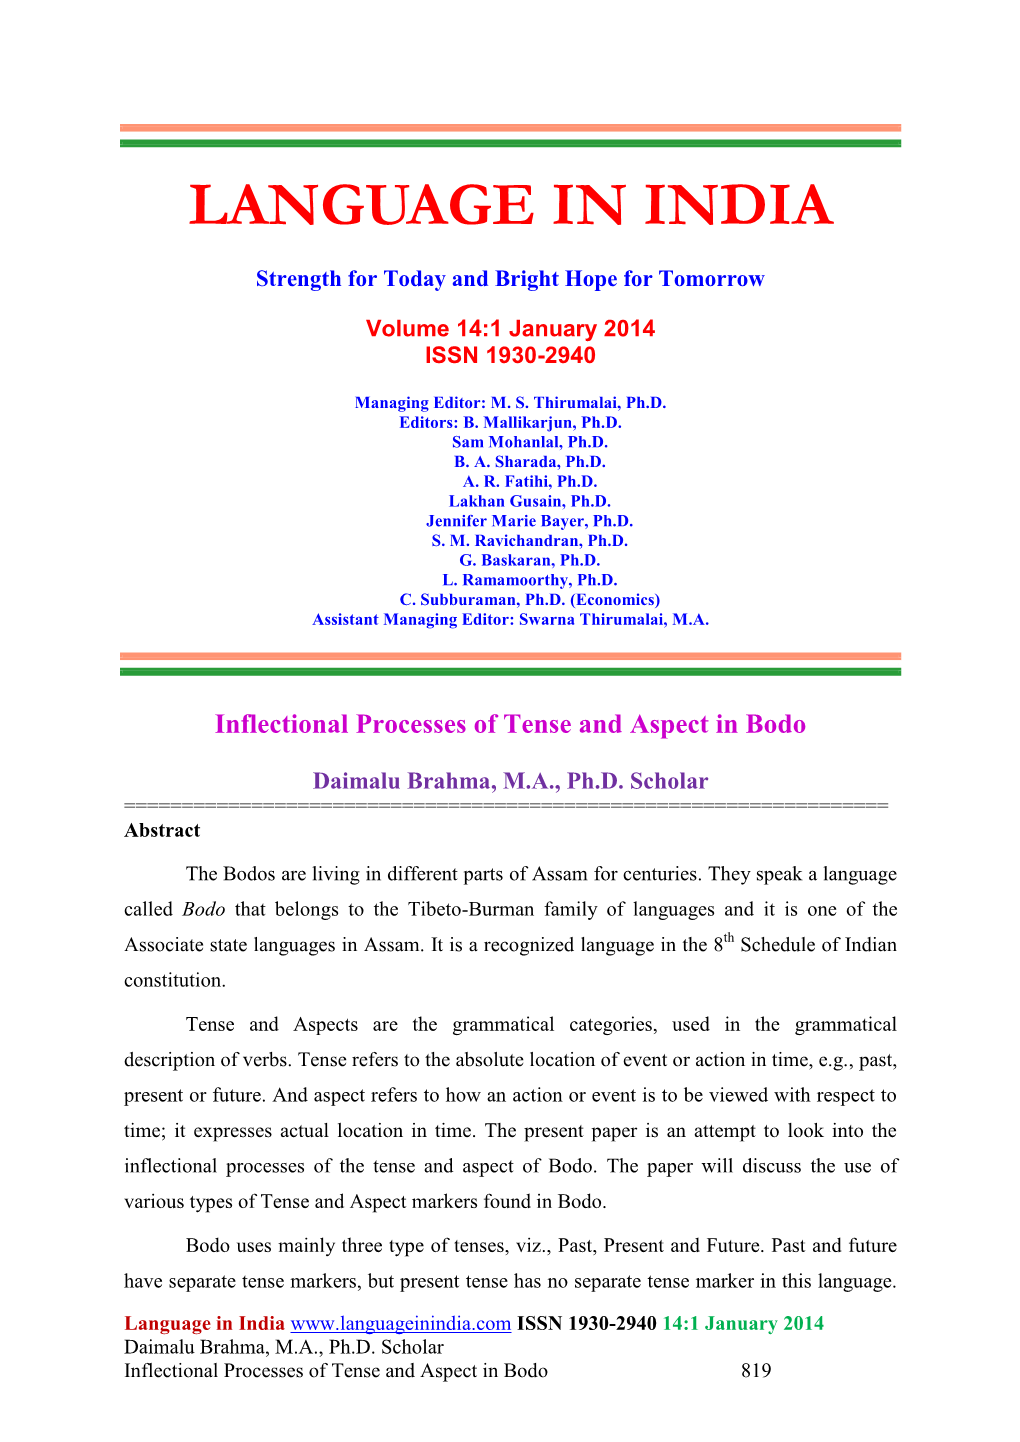 Inflectional Processes of Tense and Aspect in Bodo